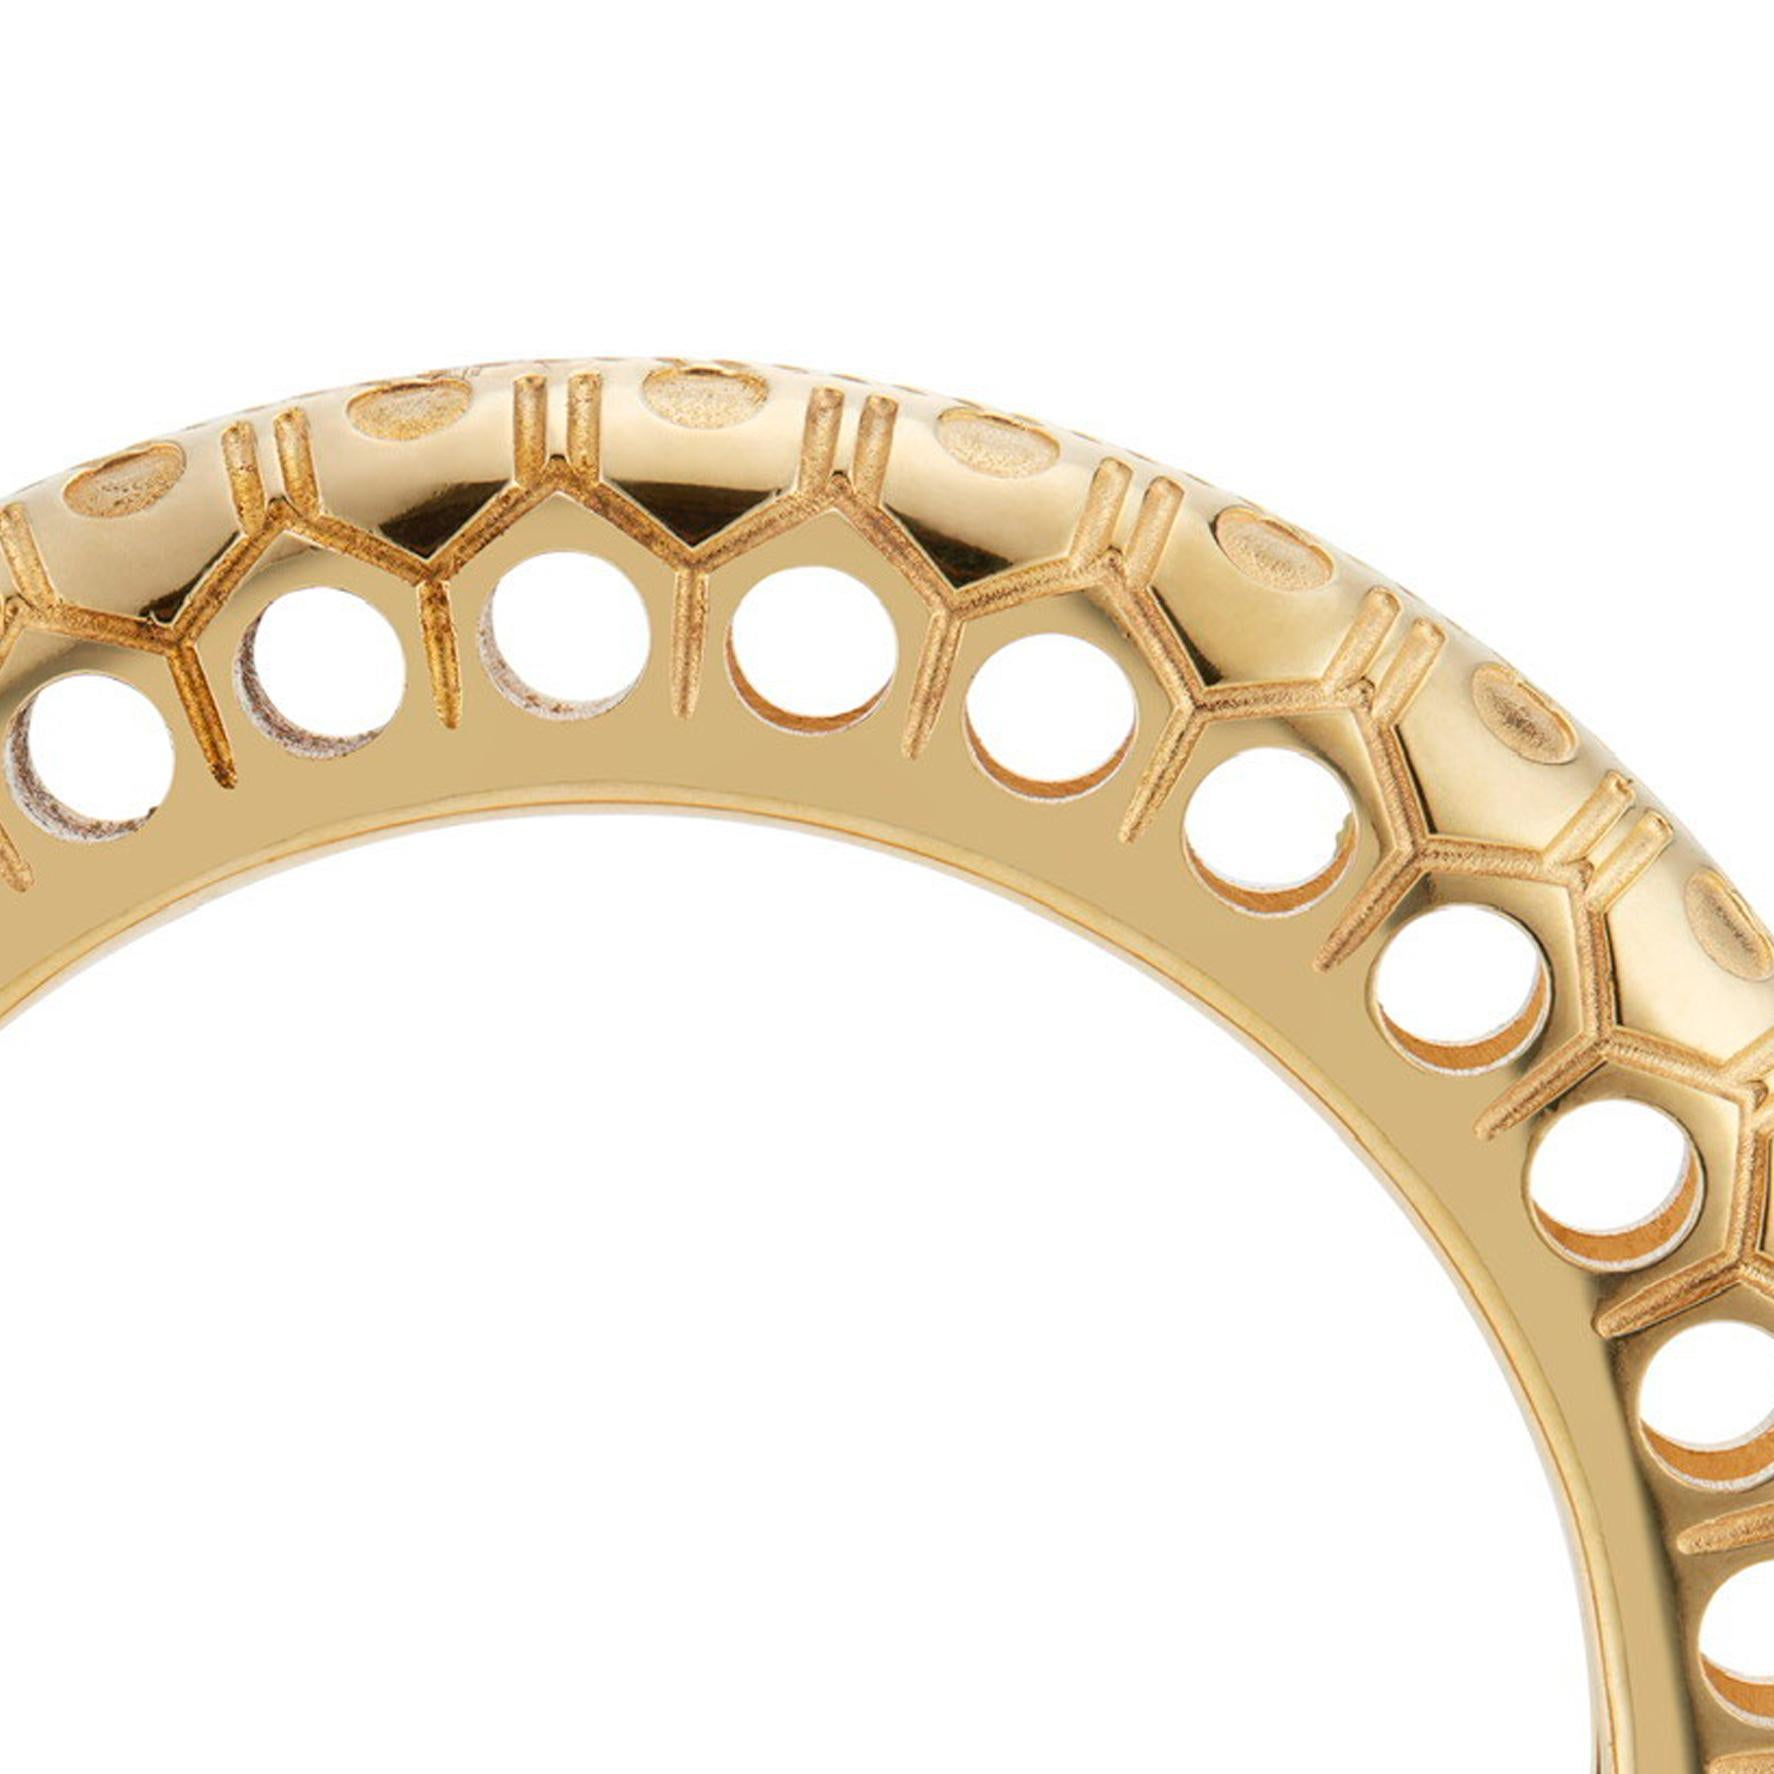 Honeycomb Bangle in 22 Karat Gold Vermeil by Chee Lee Designs

An intricately crafted bangle that is formidable and powerful yet an elegant and regal statement piece.

All items are made to order, please allow 10-15 business days for items to ship